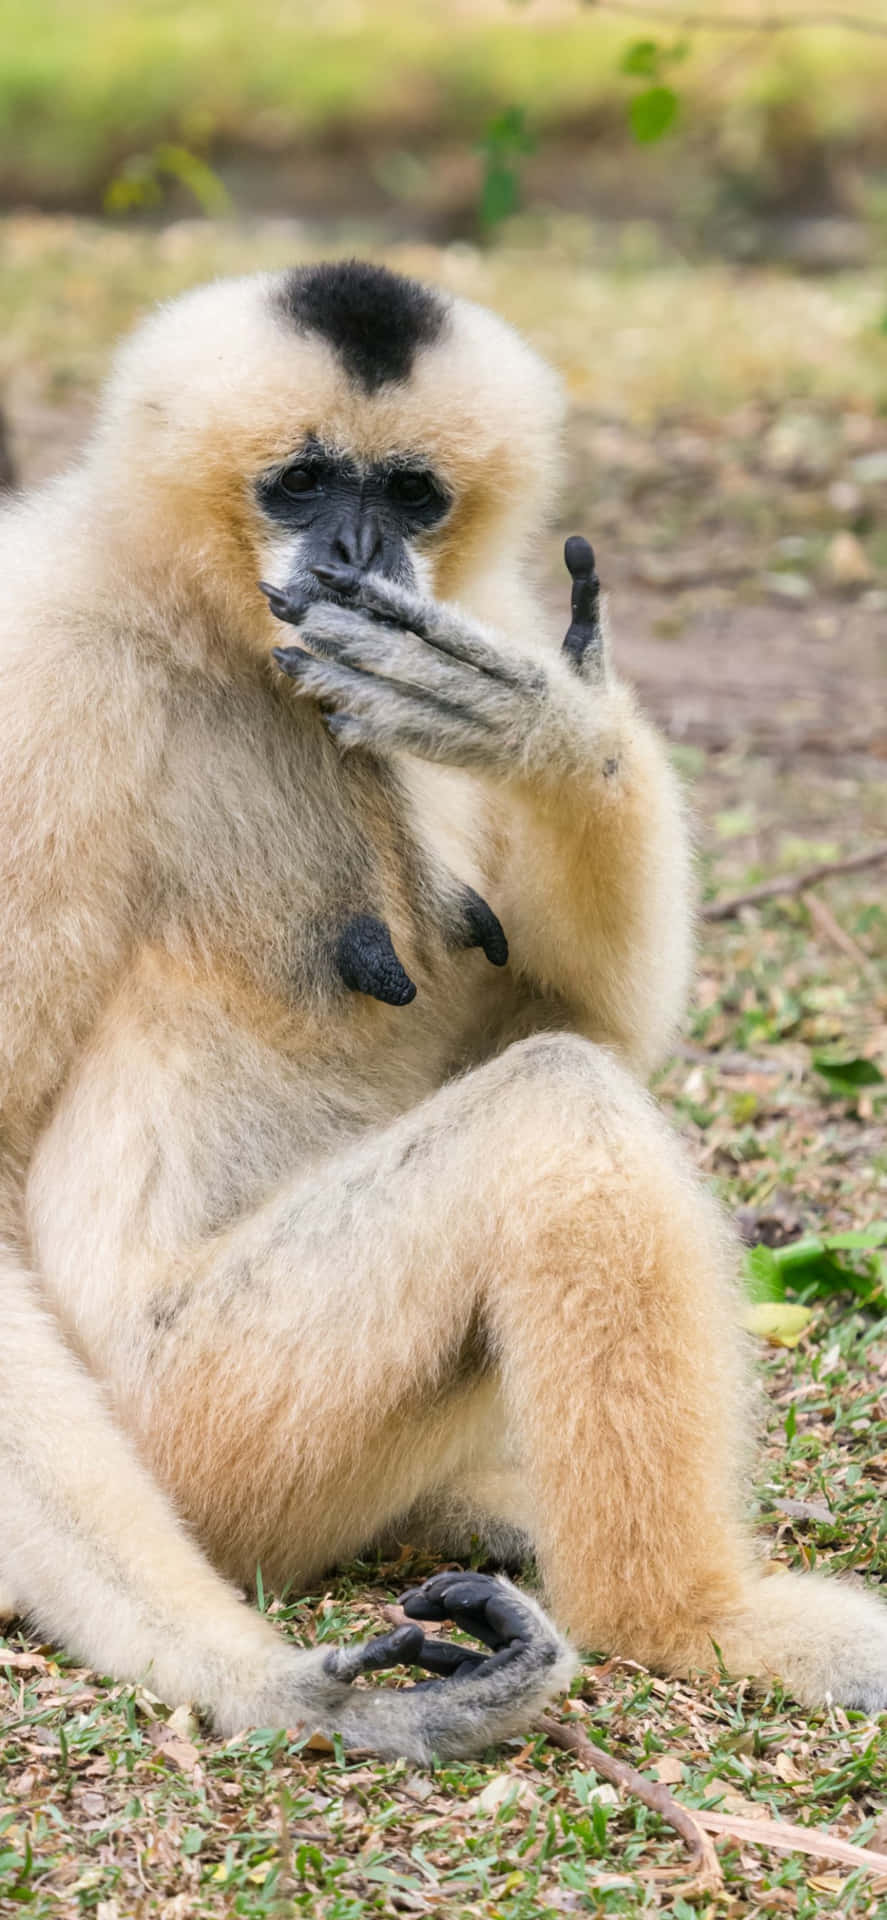 A Monkey Is Sitting On The Ground With Its Hands On Its Face